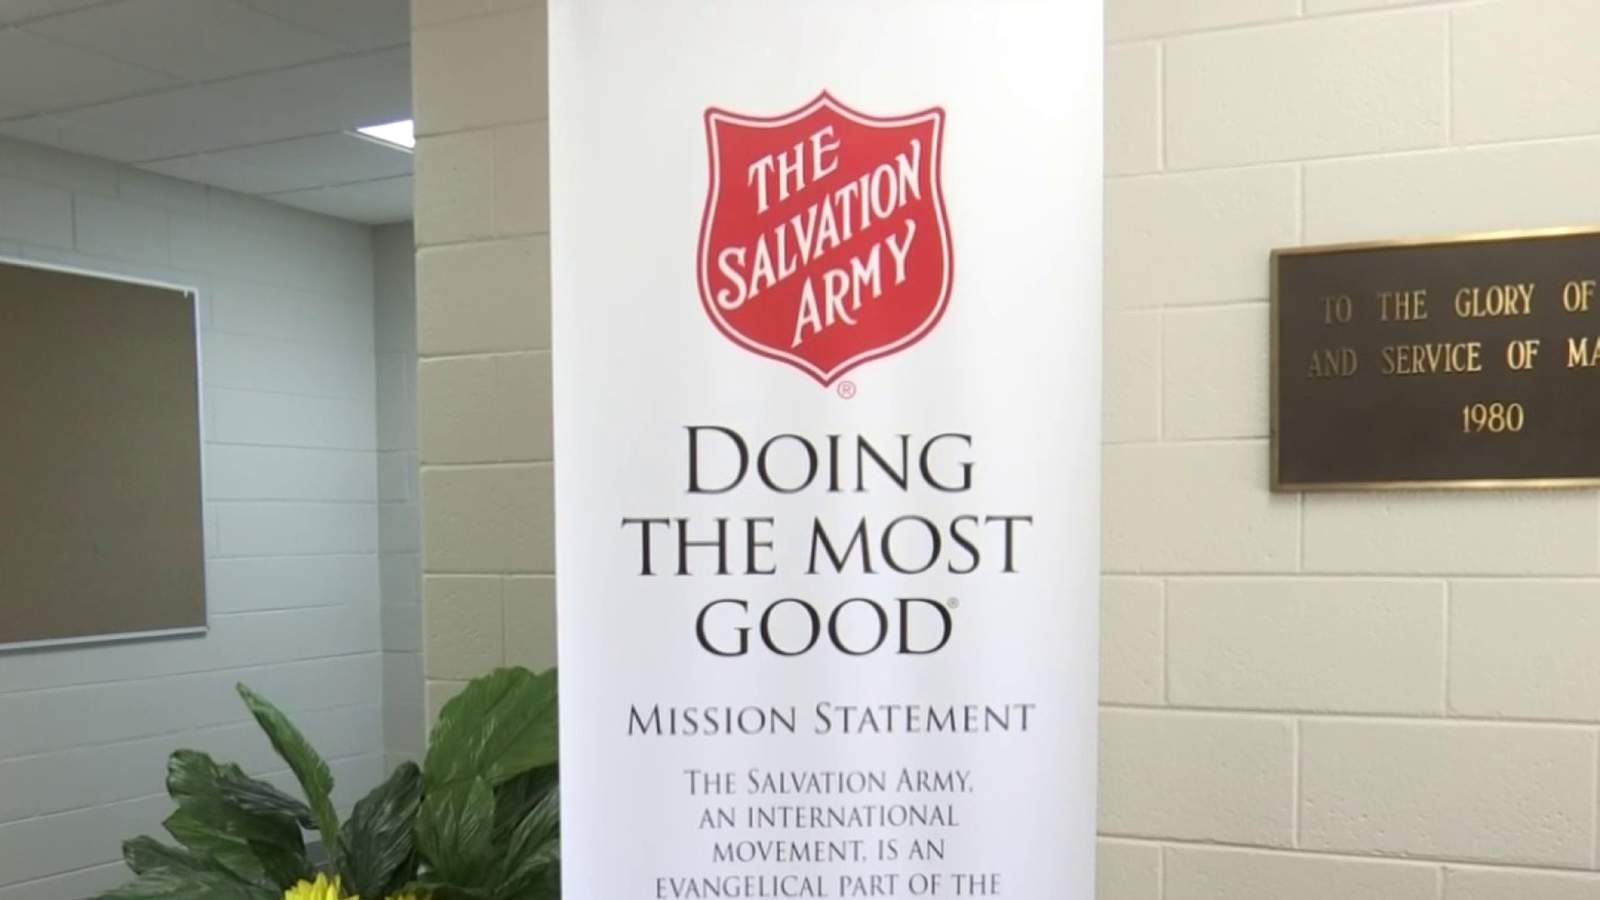 Lynchburg Salvation Army running low on money to help families impacted by pandemic